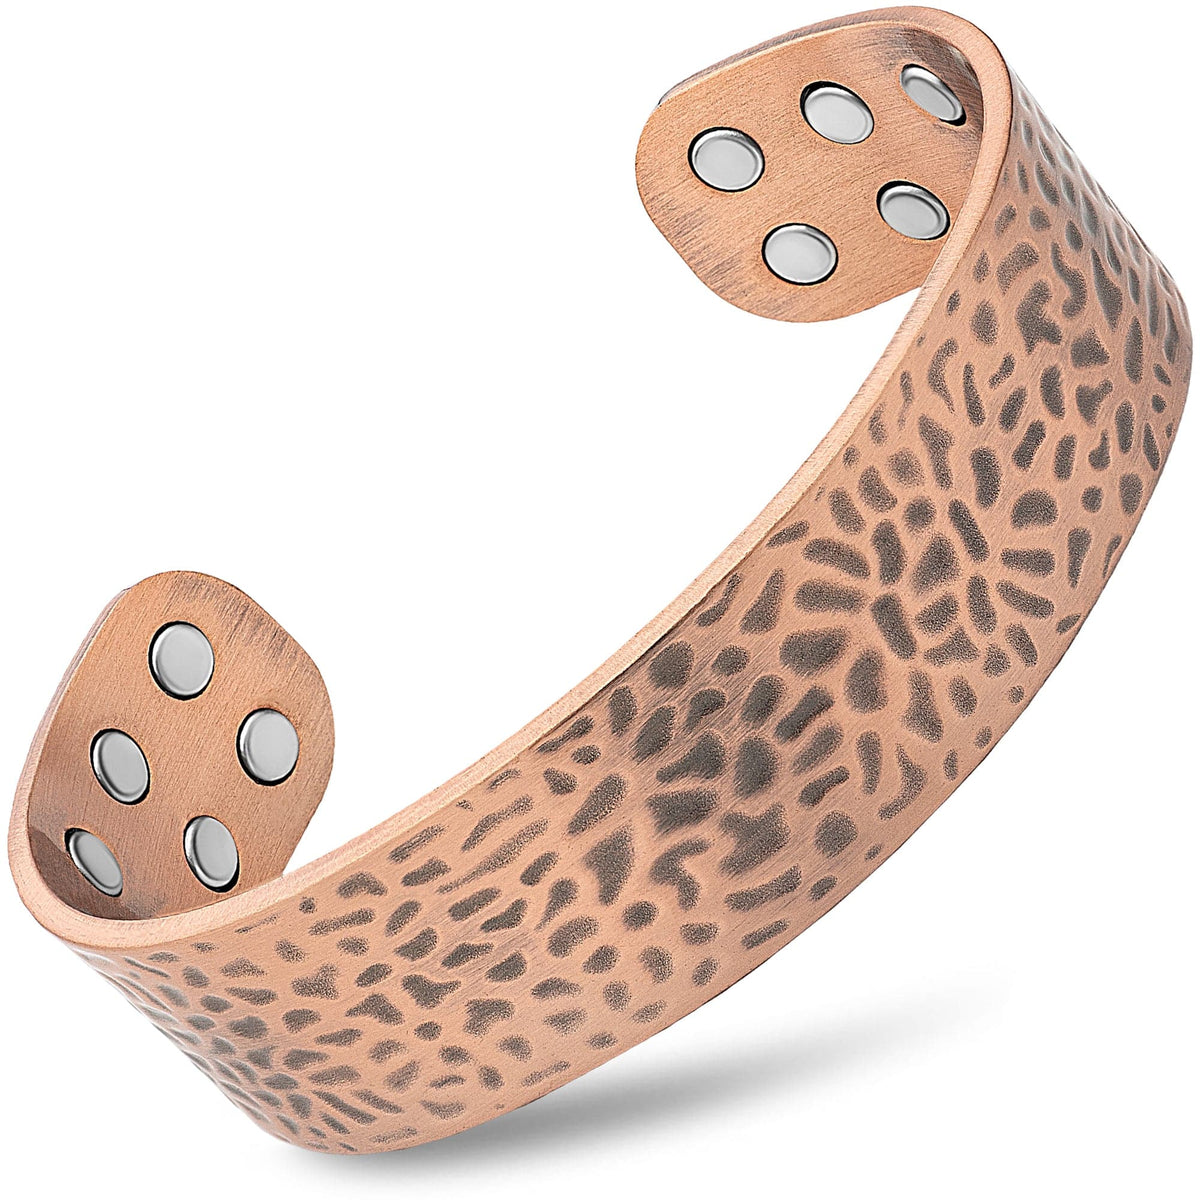 Mega Strength Magnetic Therapy Bracelet Wide Hammered Copper Cuff